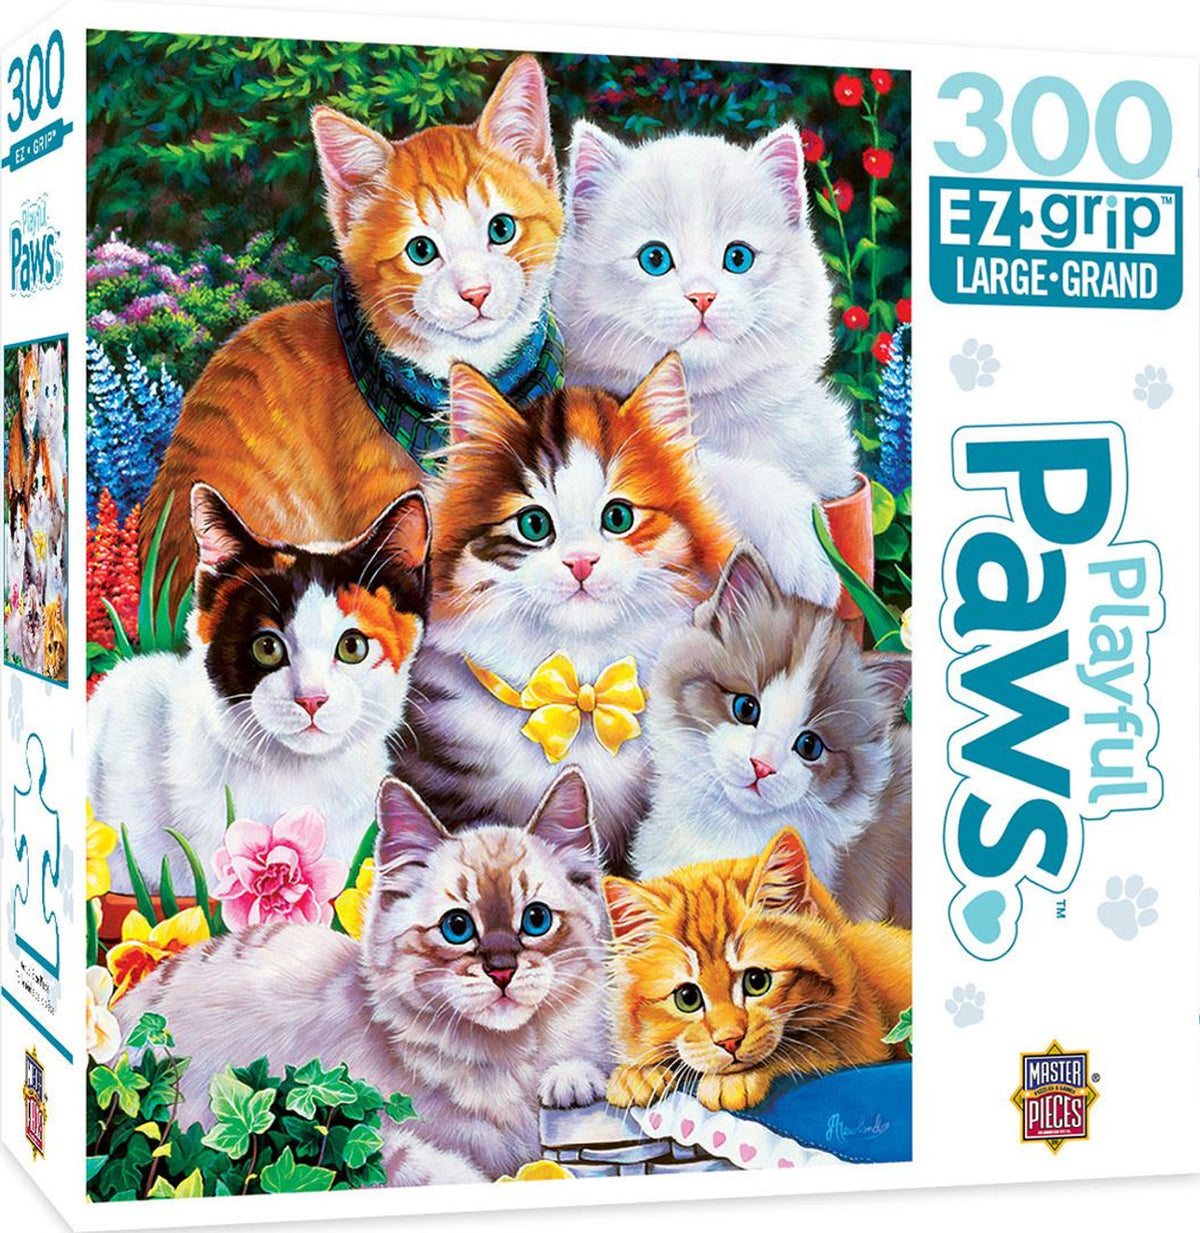 Masterpieces Playful Paws Purrfectly Adorable Ez Grip Puzzle 300 Piece Jigsaw